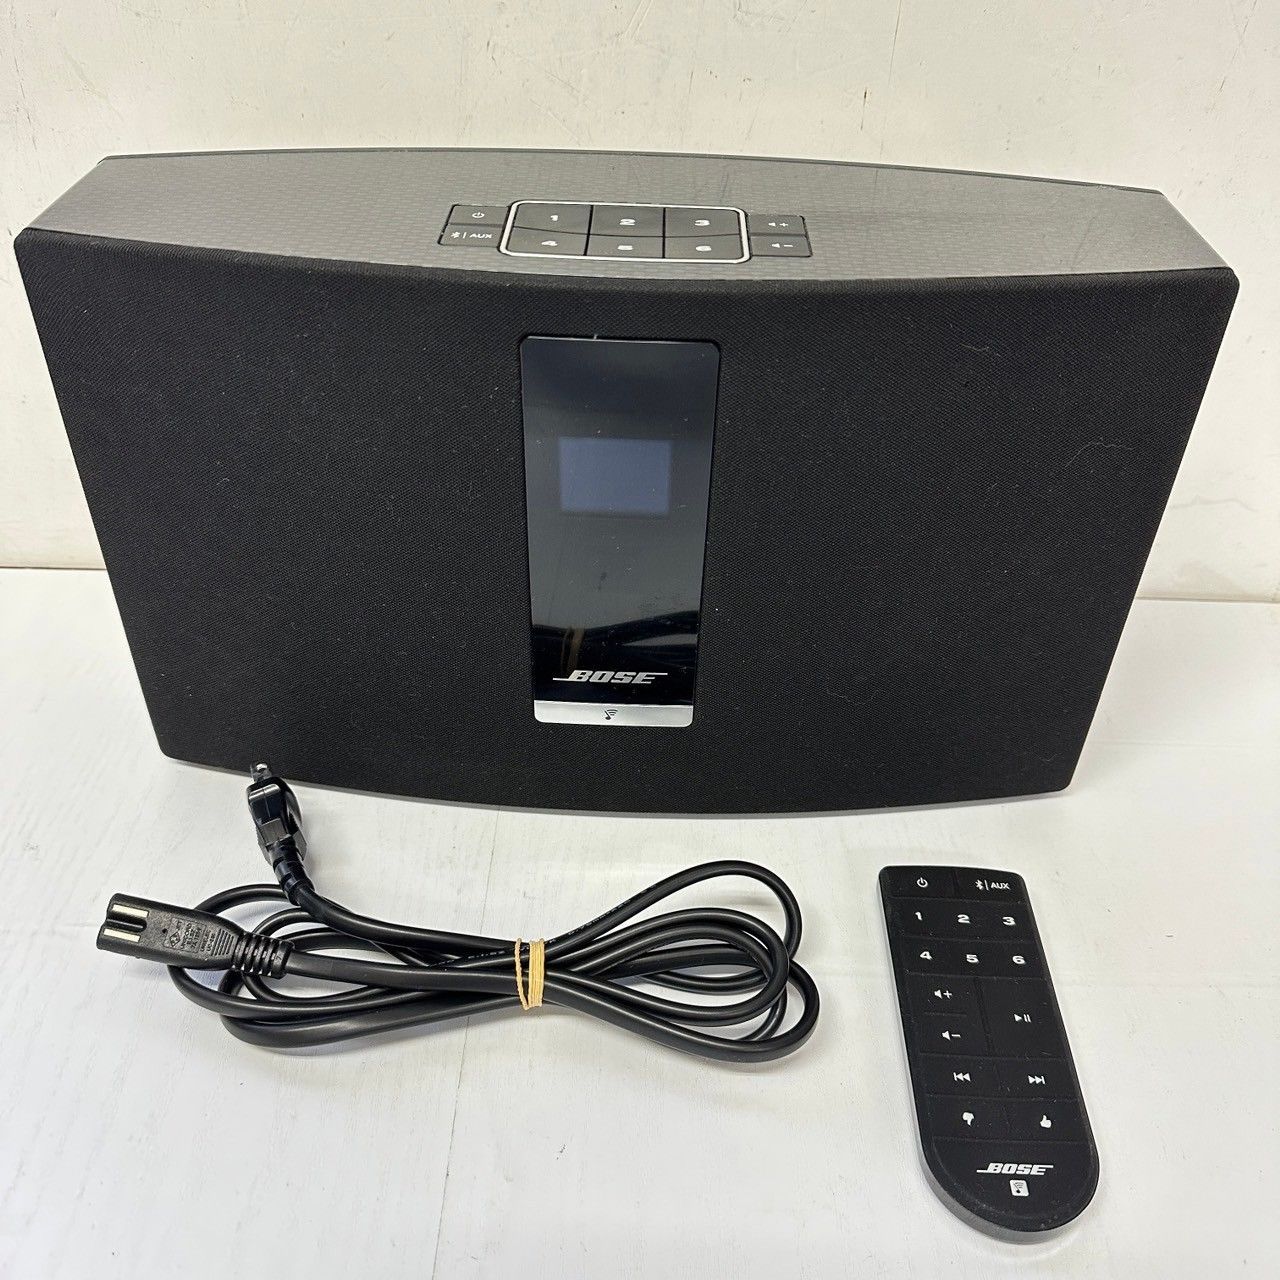 BOSE SOUNDTOUCH 20 WIRELESS MUSIC SYSTEM13000円は厳しいです